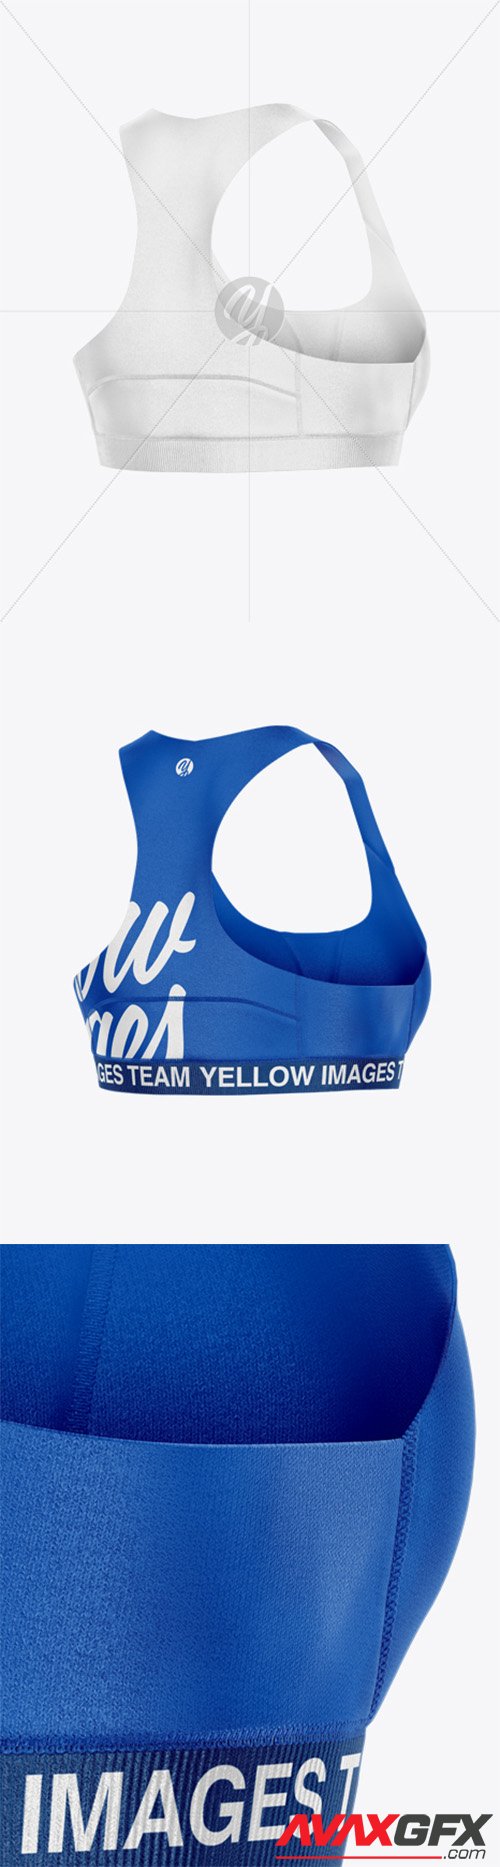 Download Sports Bra Mockup - Half Side View 43704 » AVAXGFX - All Downloads that You Need in One Place ...